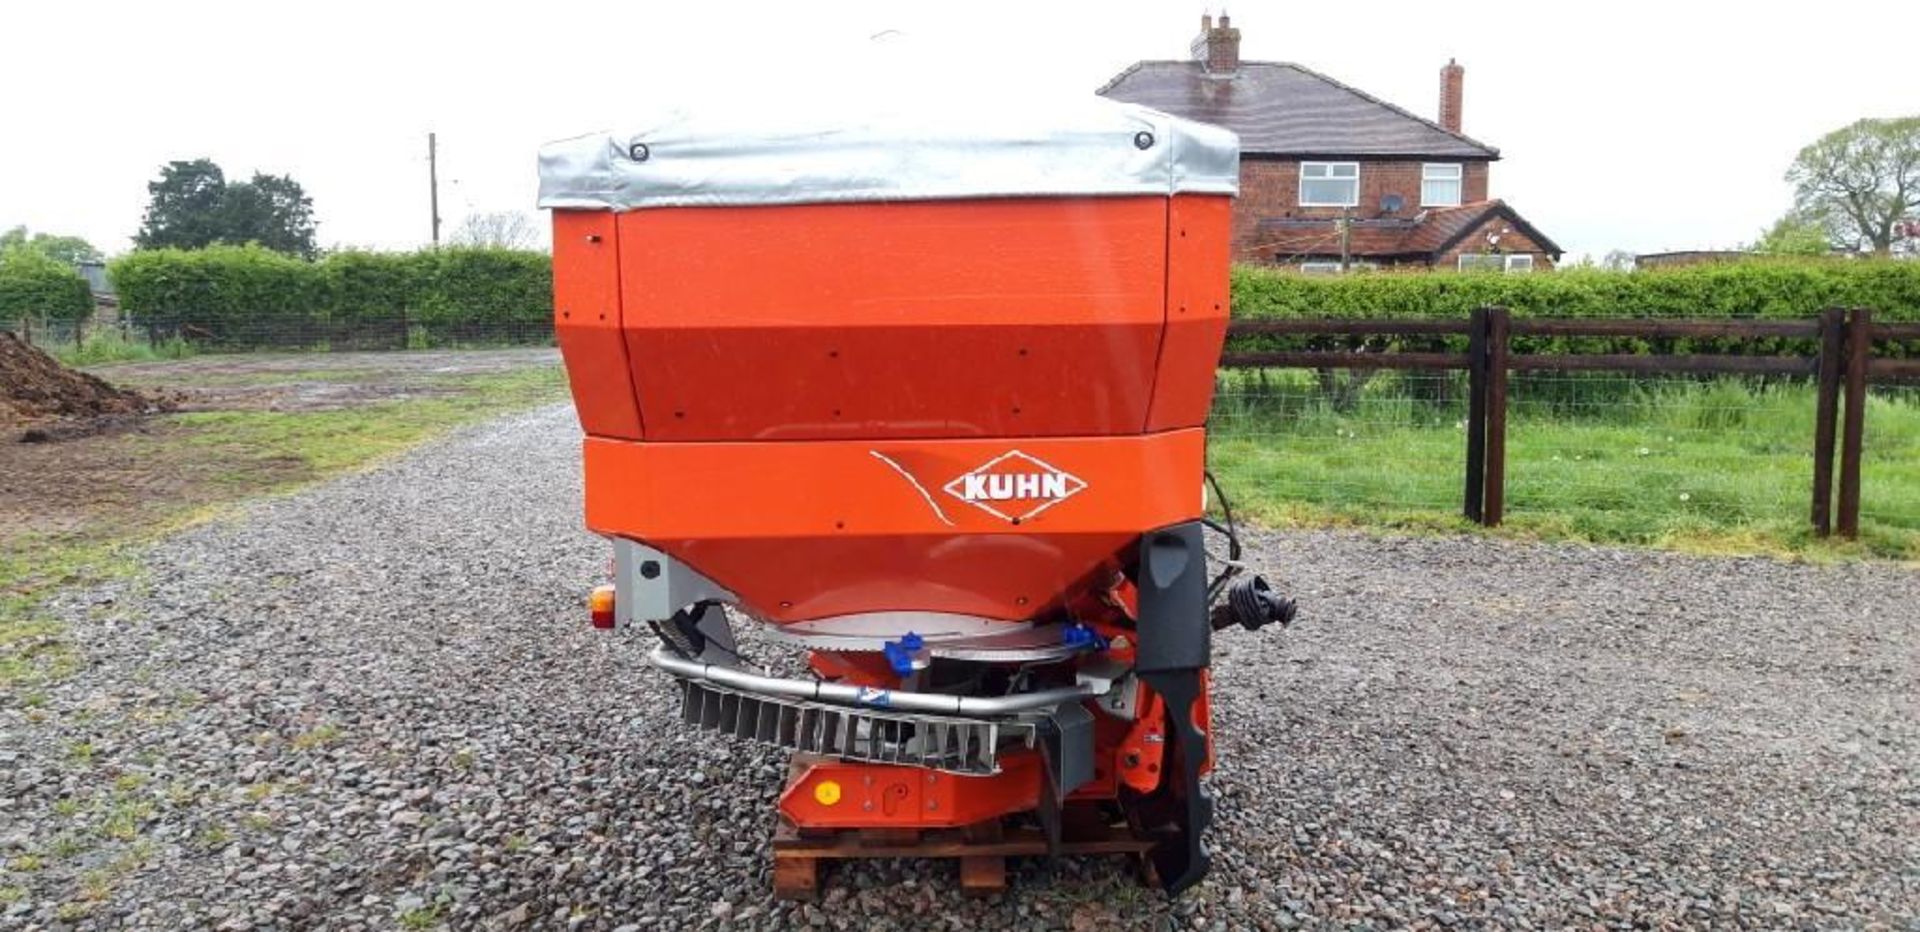 Kuhn Axis 40.1 W Weigh Cell Fertiliser Spreader - Image 7 of 14